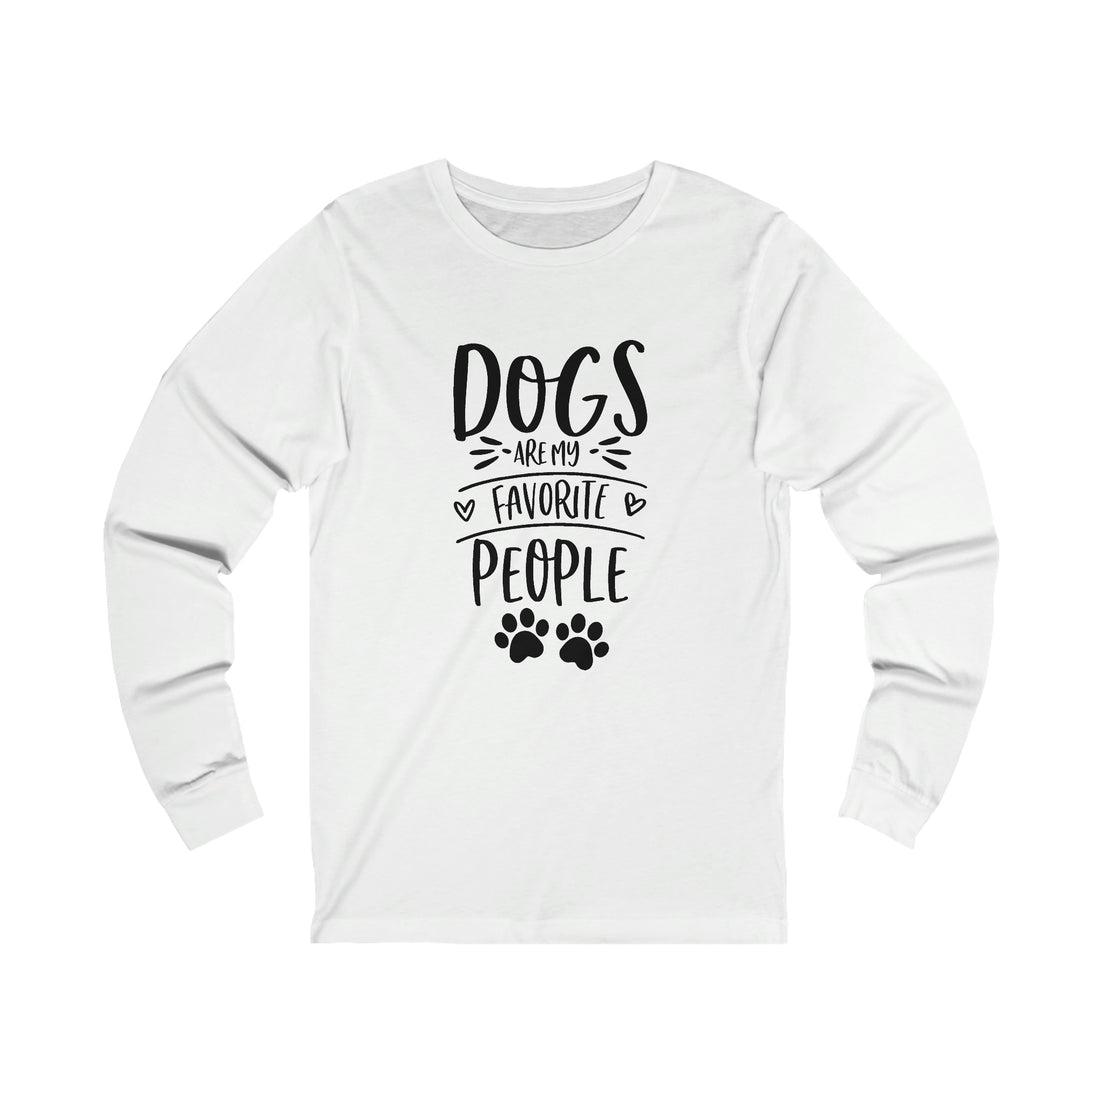 Dogs Are My Favorite People - Unisex Jersey Long Sleeve Tee